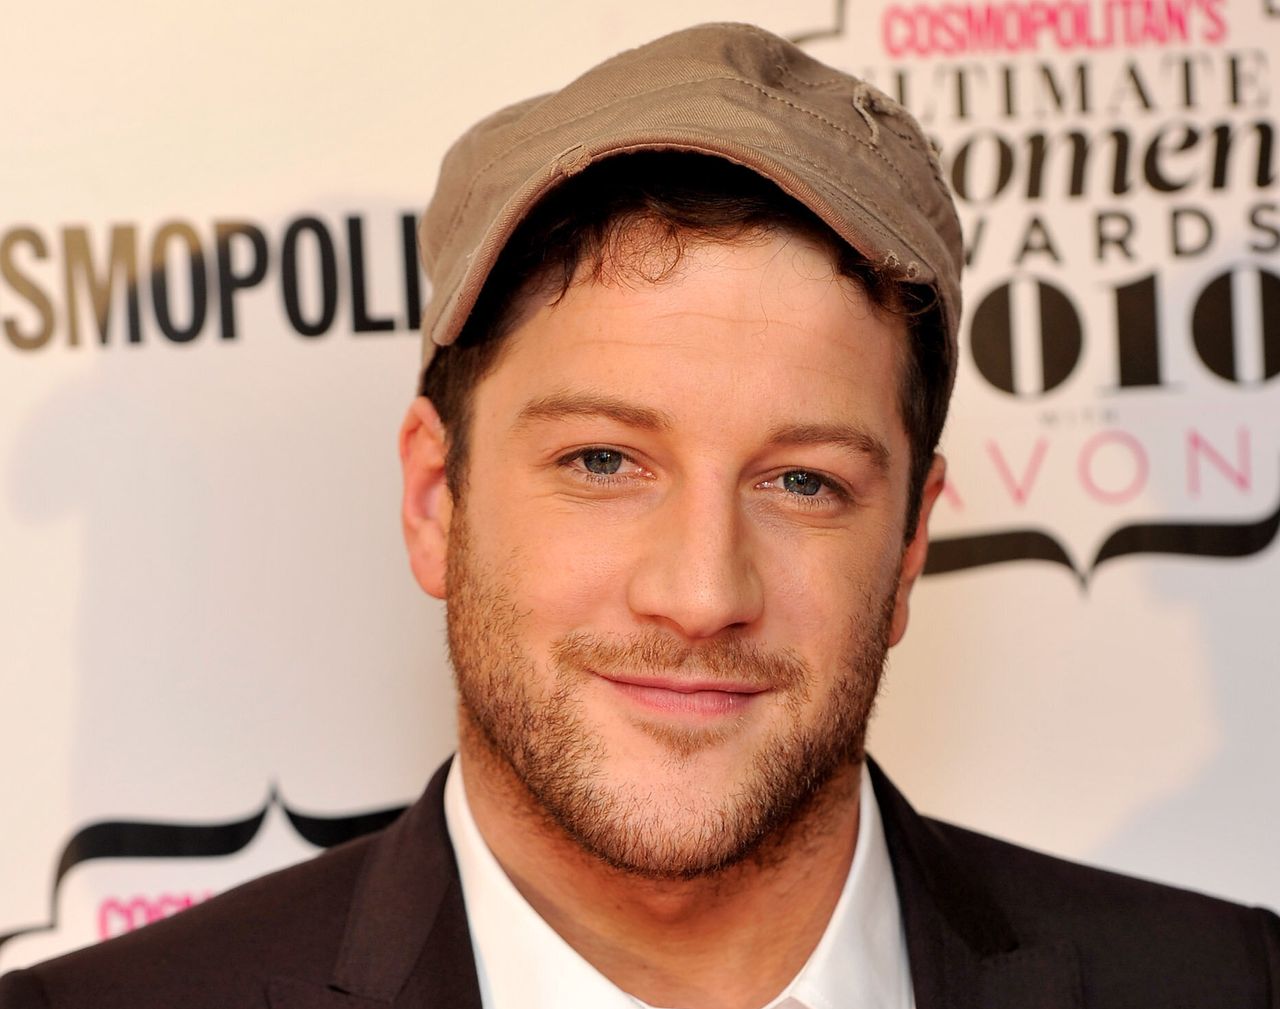 Matt Cardle, who beat One Direction to win The X Factor in 2010, pictured around the time of the show